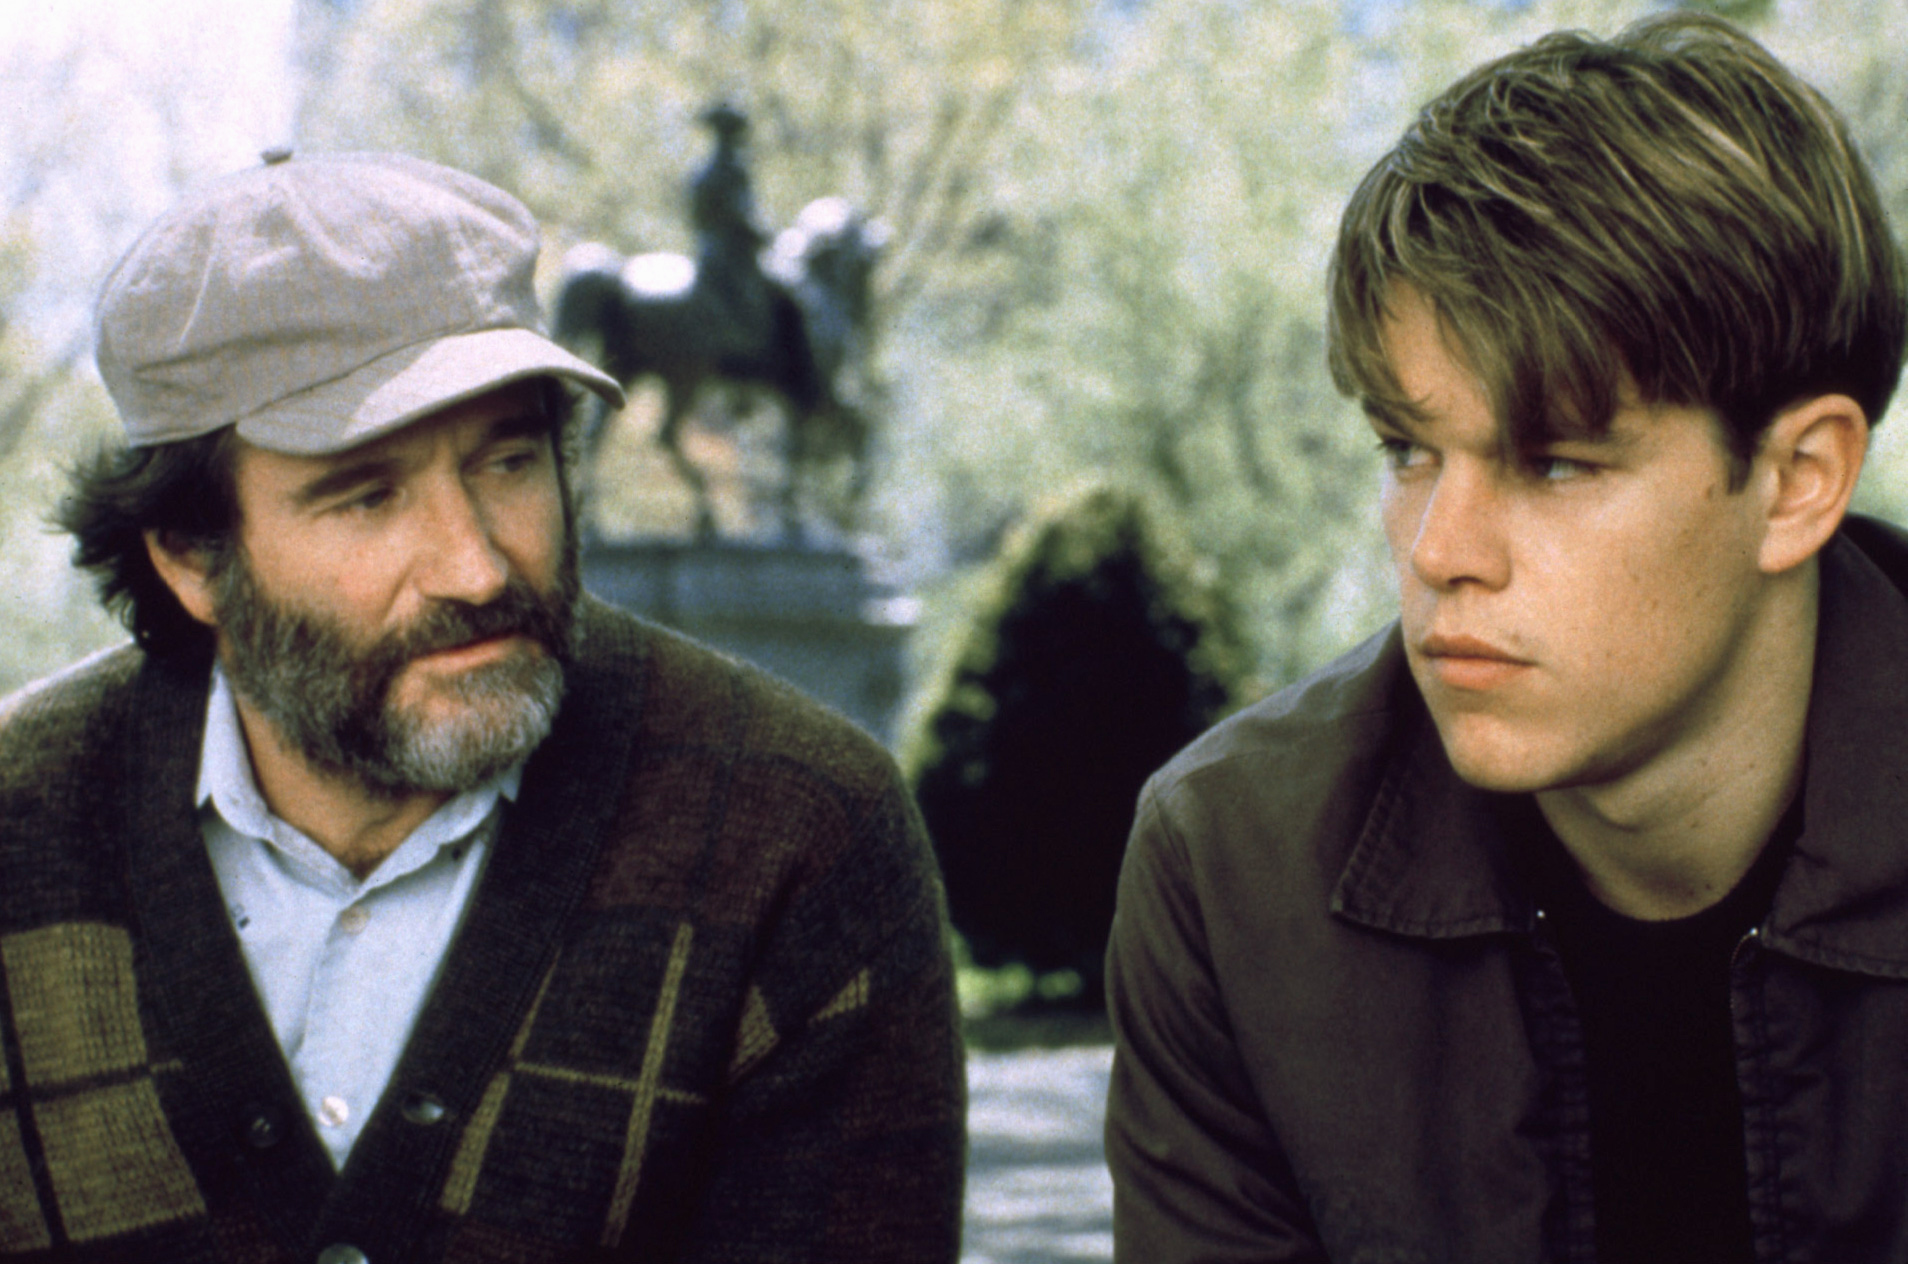 Robin Williams and Matt Damon in the 1997 drama movie "Good Will Hunting" | Source: Getty Images